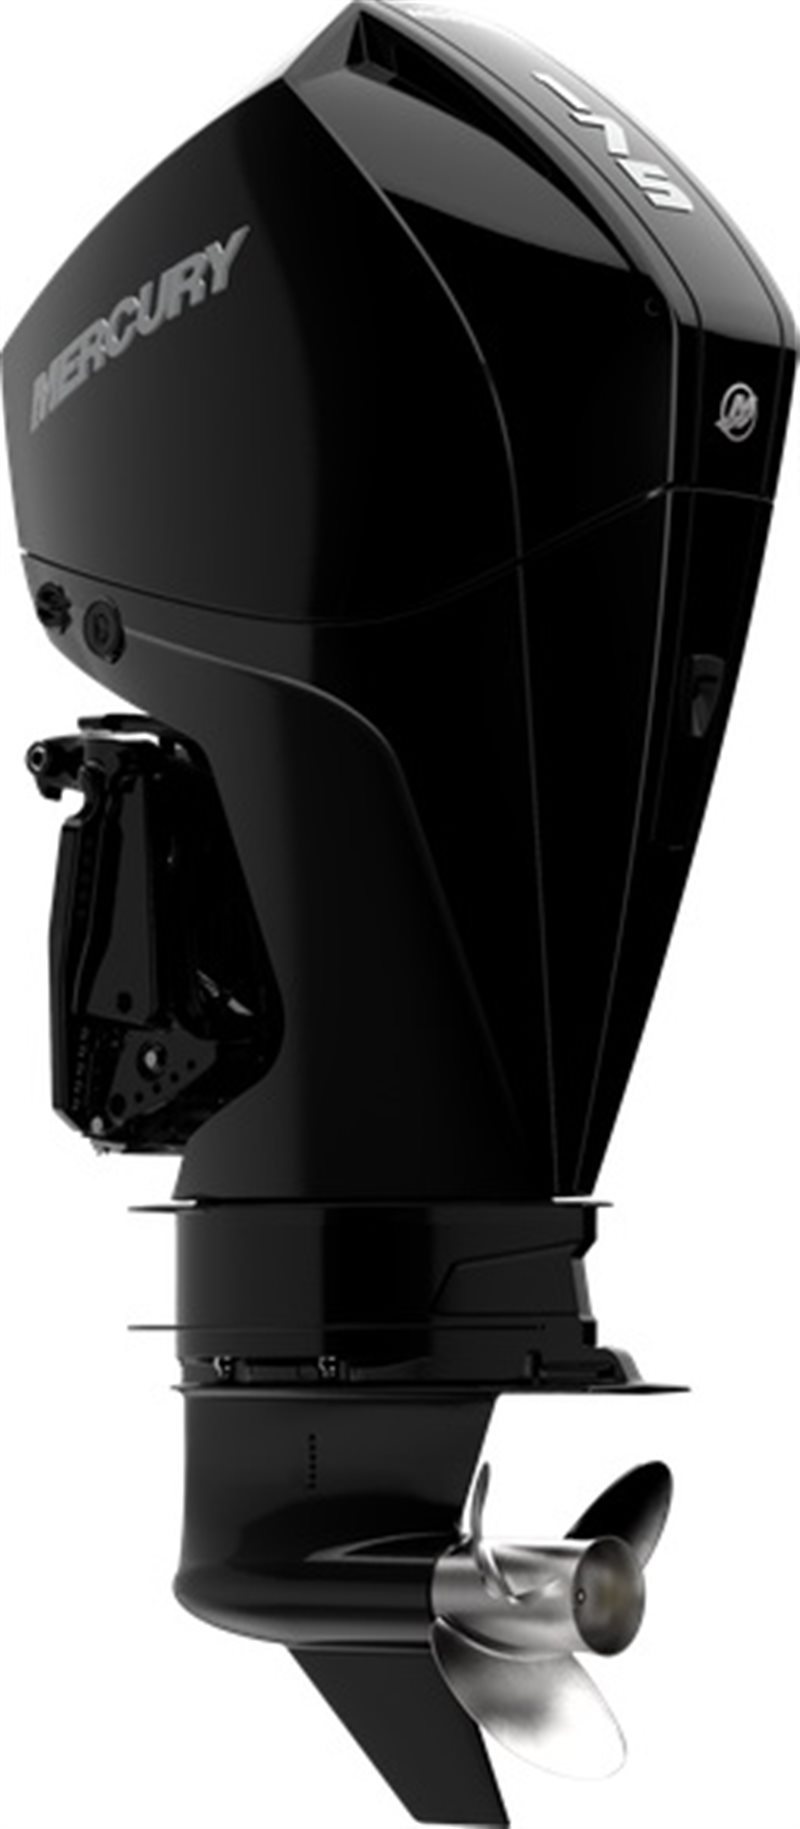 2021 Mercury Outboard Fourstroke 175 - 300 200 HP at DT Powersports & Marine